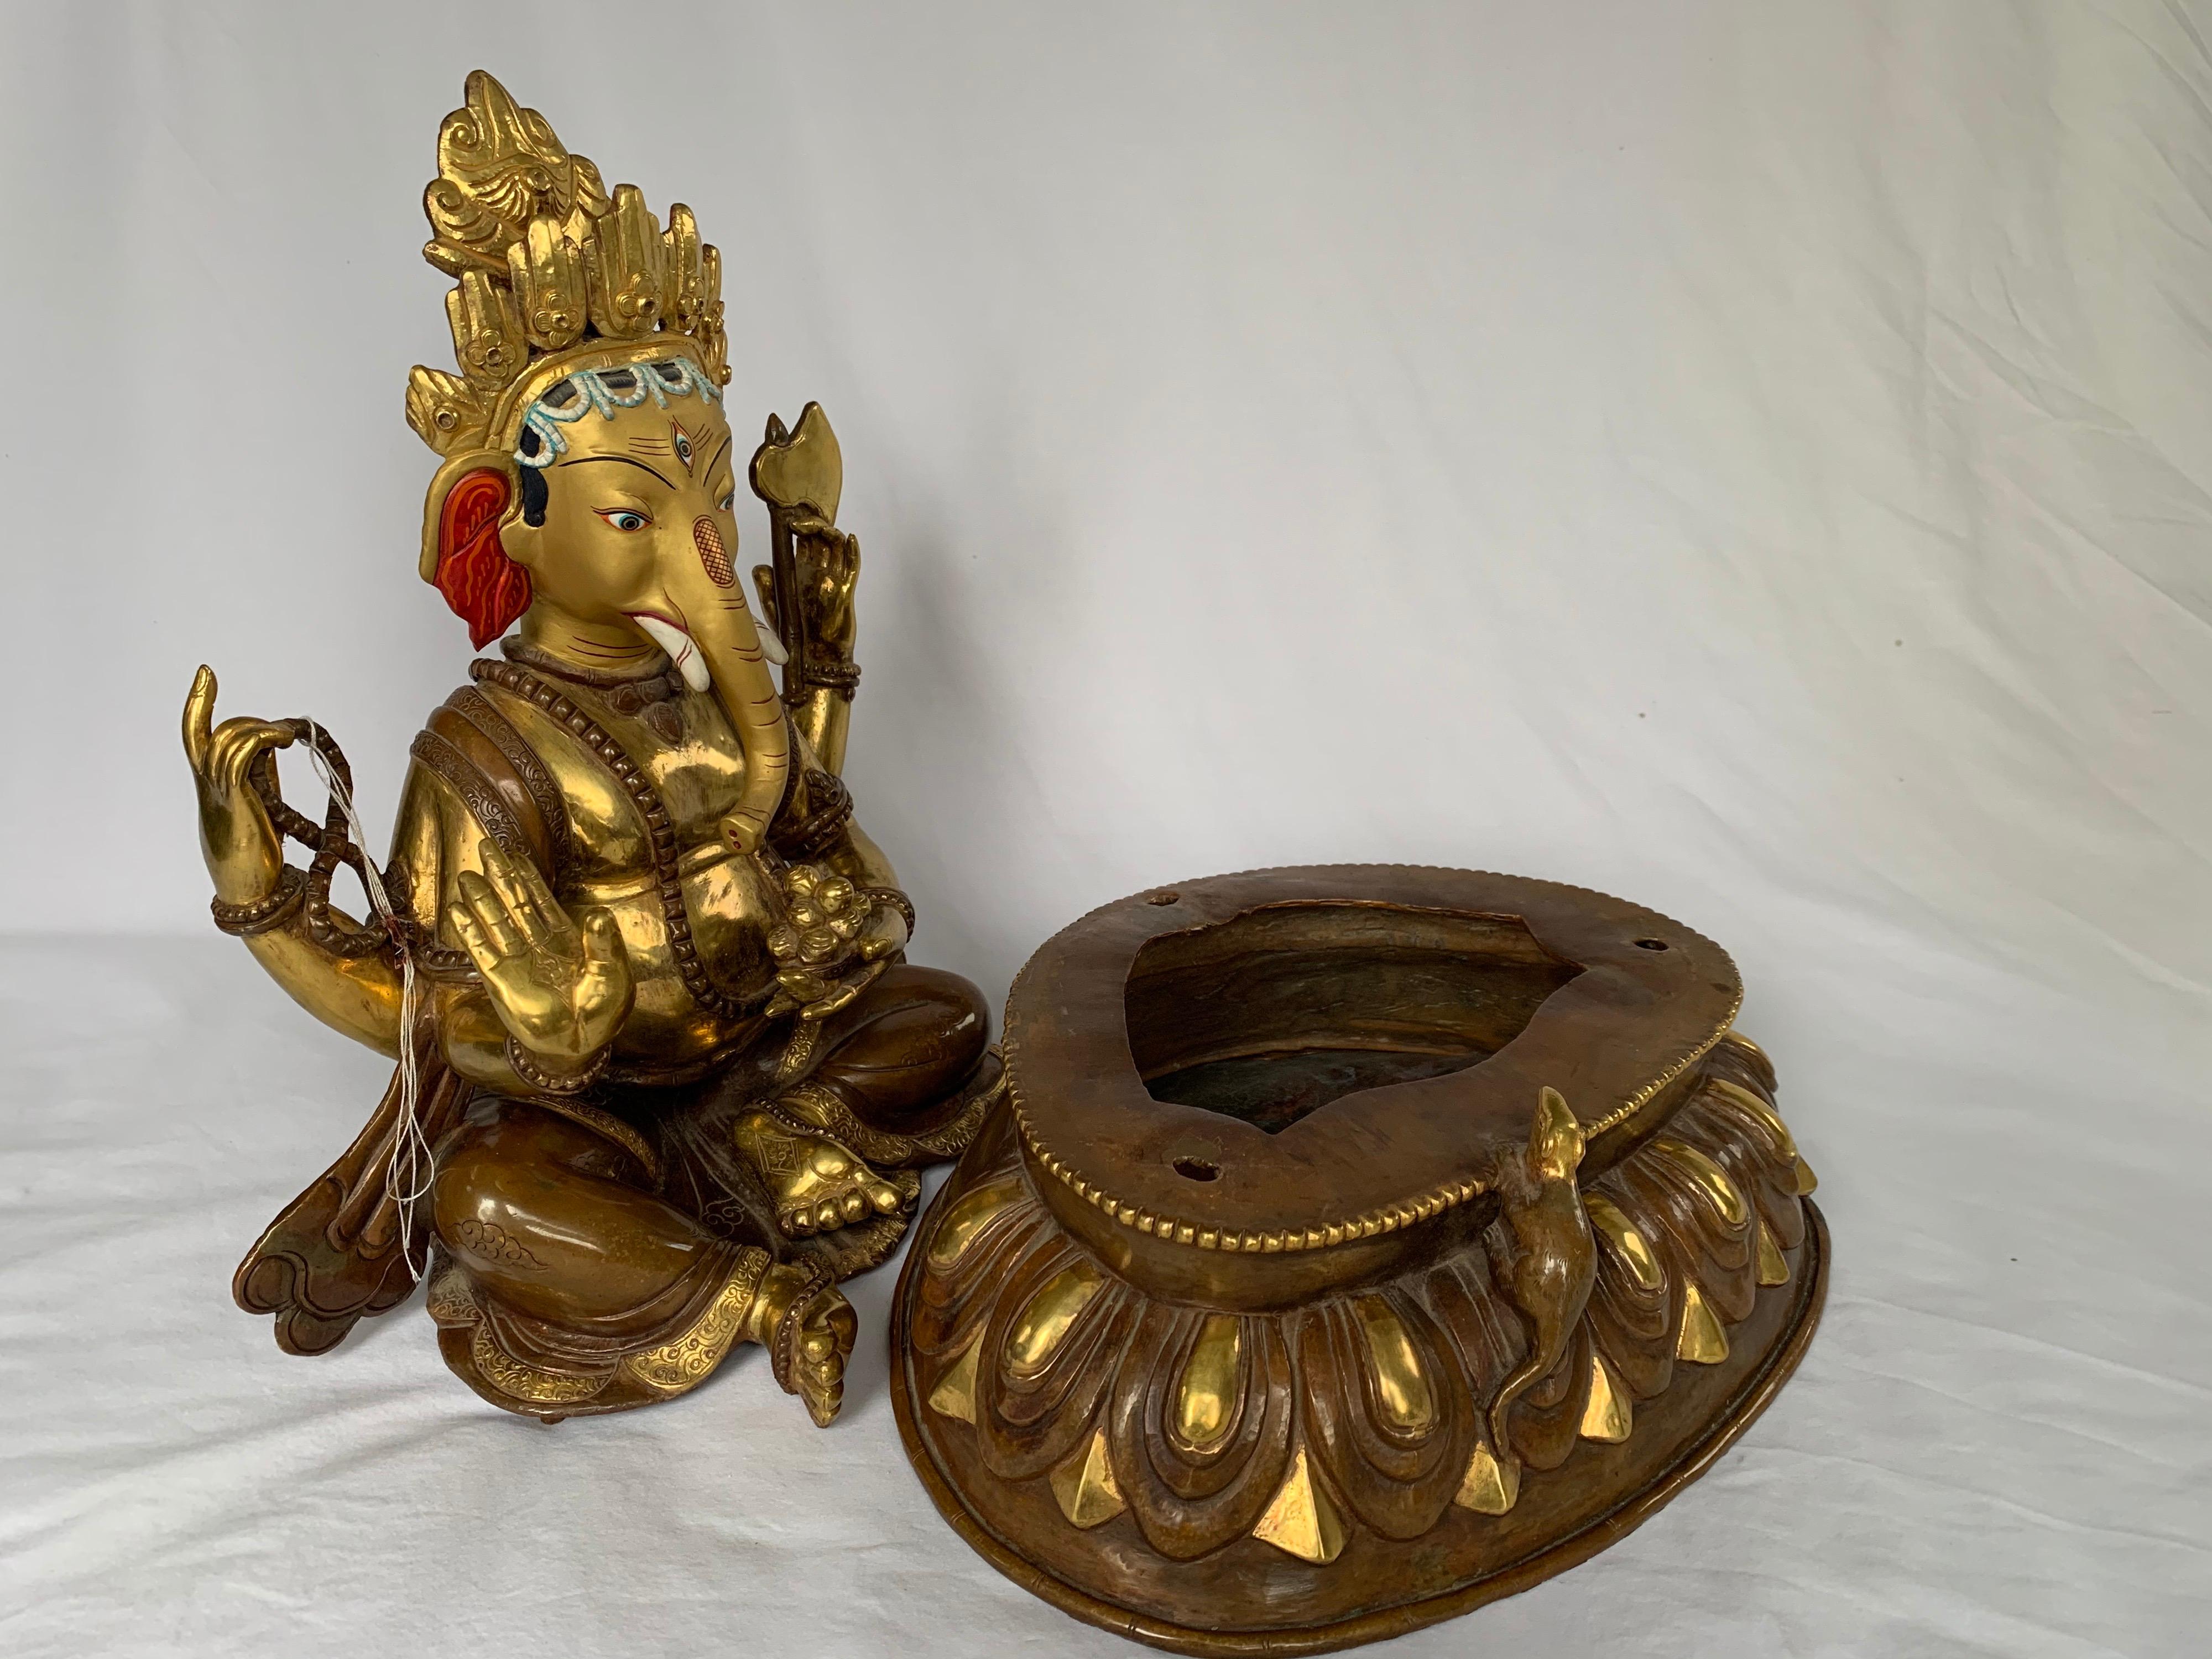 This statue is handcrafted by lost wax process which is one of the ancient process of metal craft. Ganesha is seated on lotus with one leg folded and another slightly extended outward. One hand is holding an axe and another a rosary, third hand is